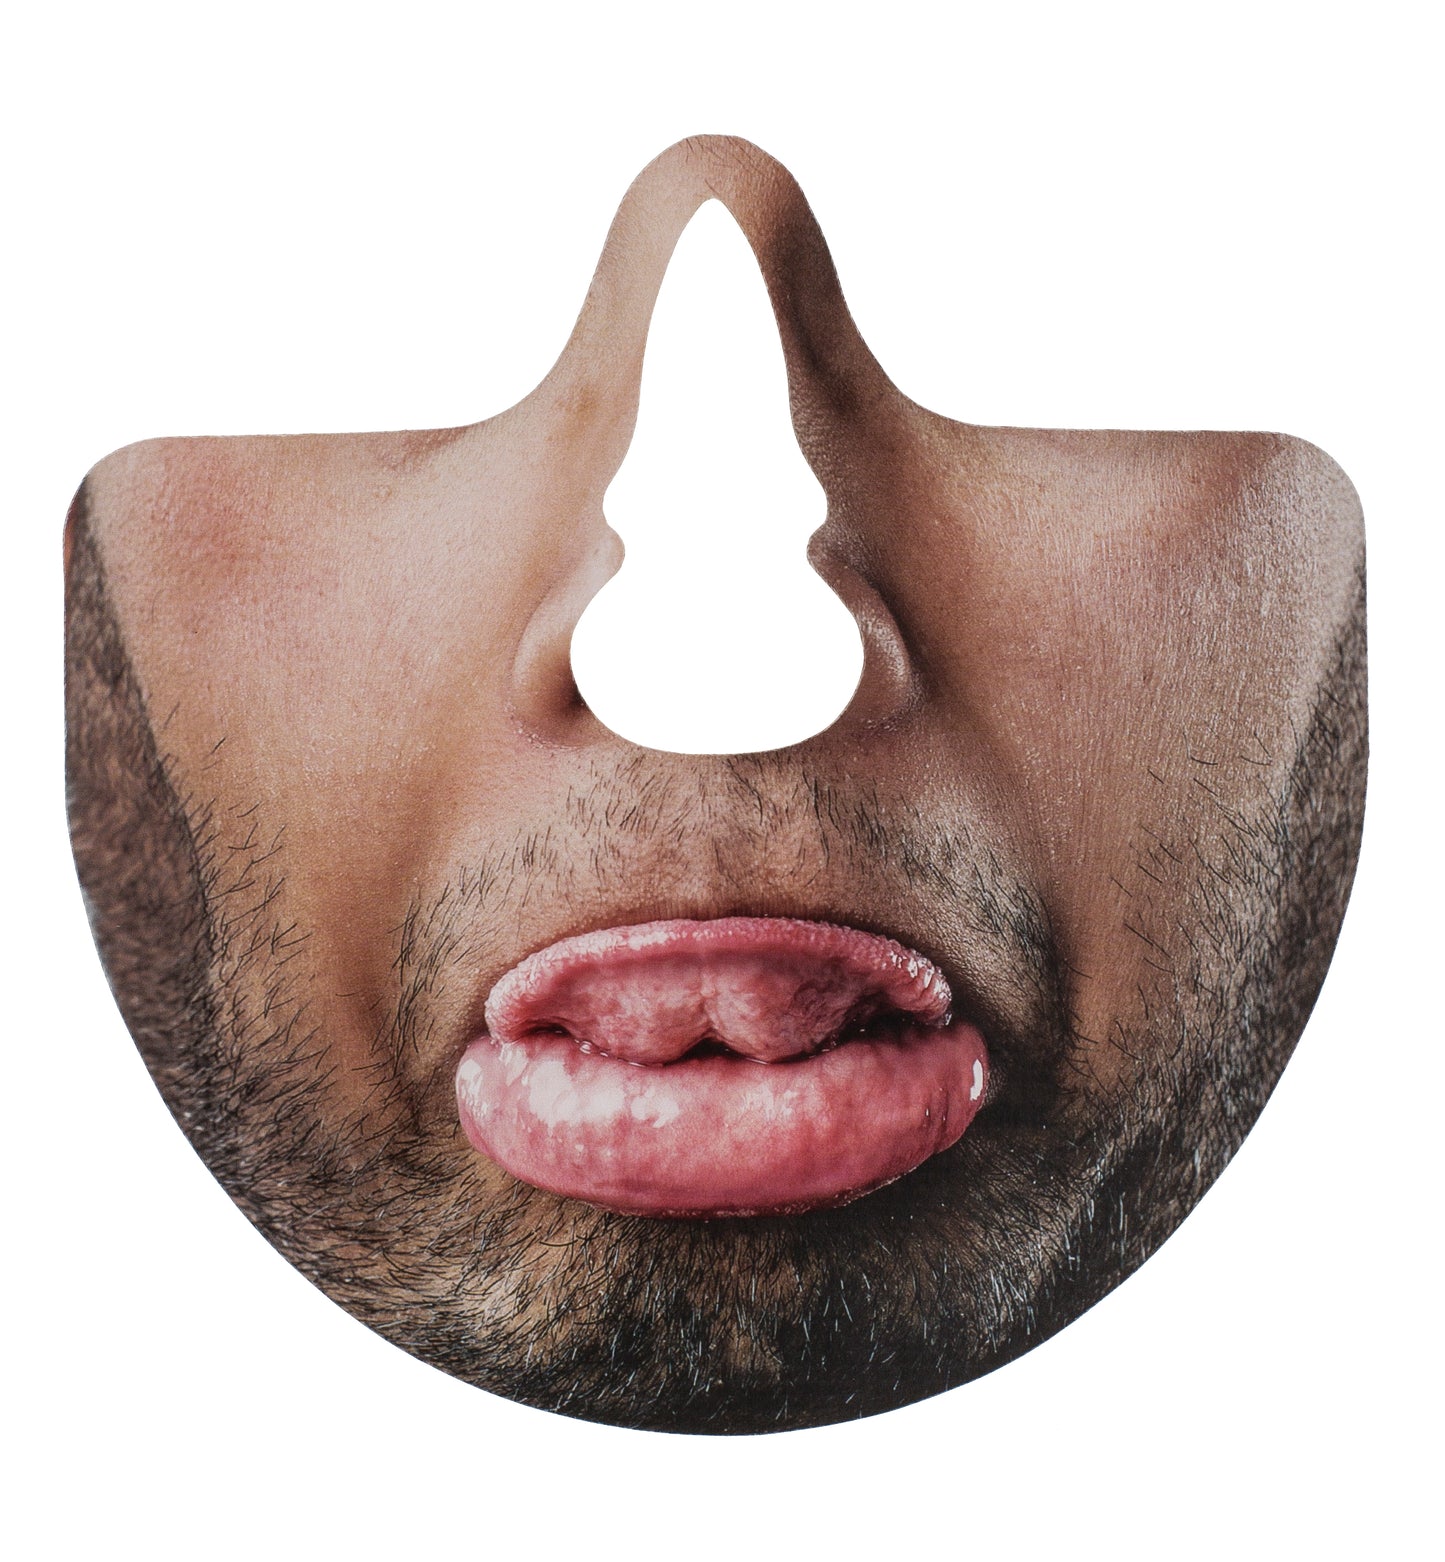 Photo Booth Accessories - Fun Disguise Nose Masks Photo Props- Set of 15